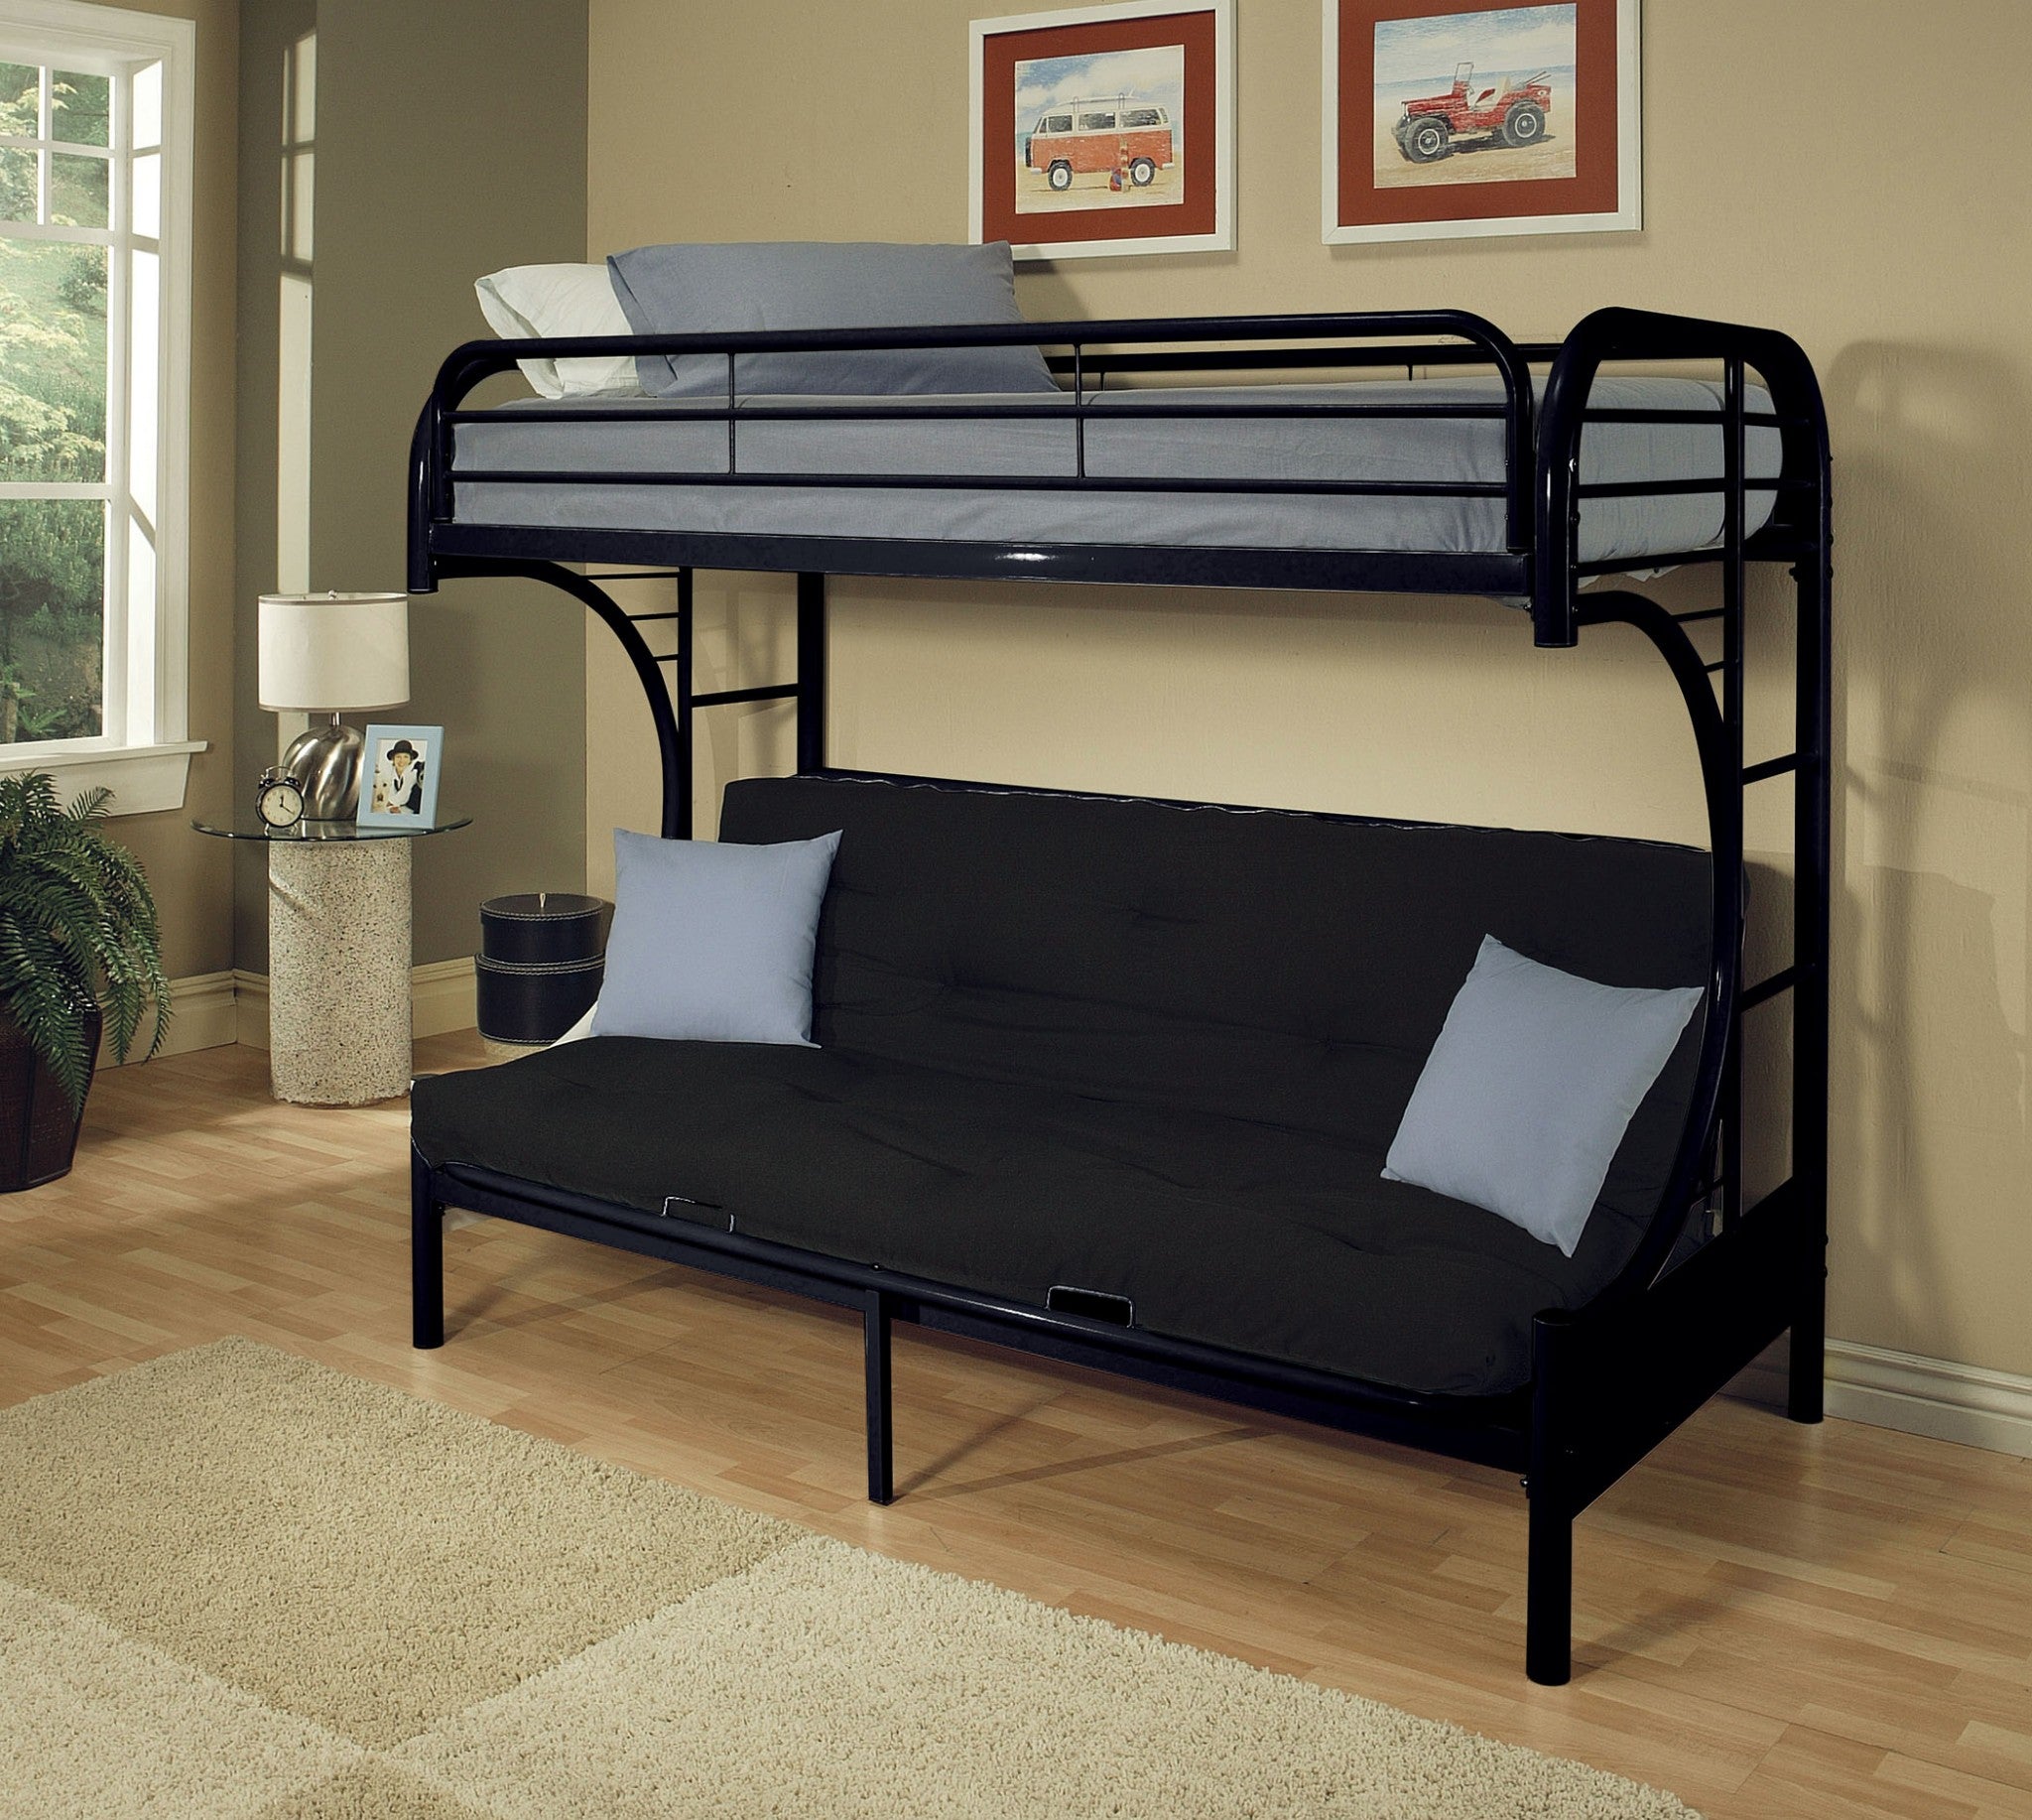 84" X 62" X 65" Twin Xl Over Queen Silver Metal Tube Futon Bunk Bed